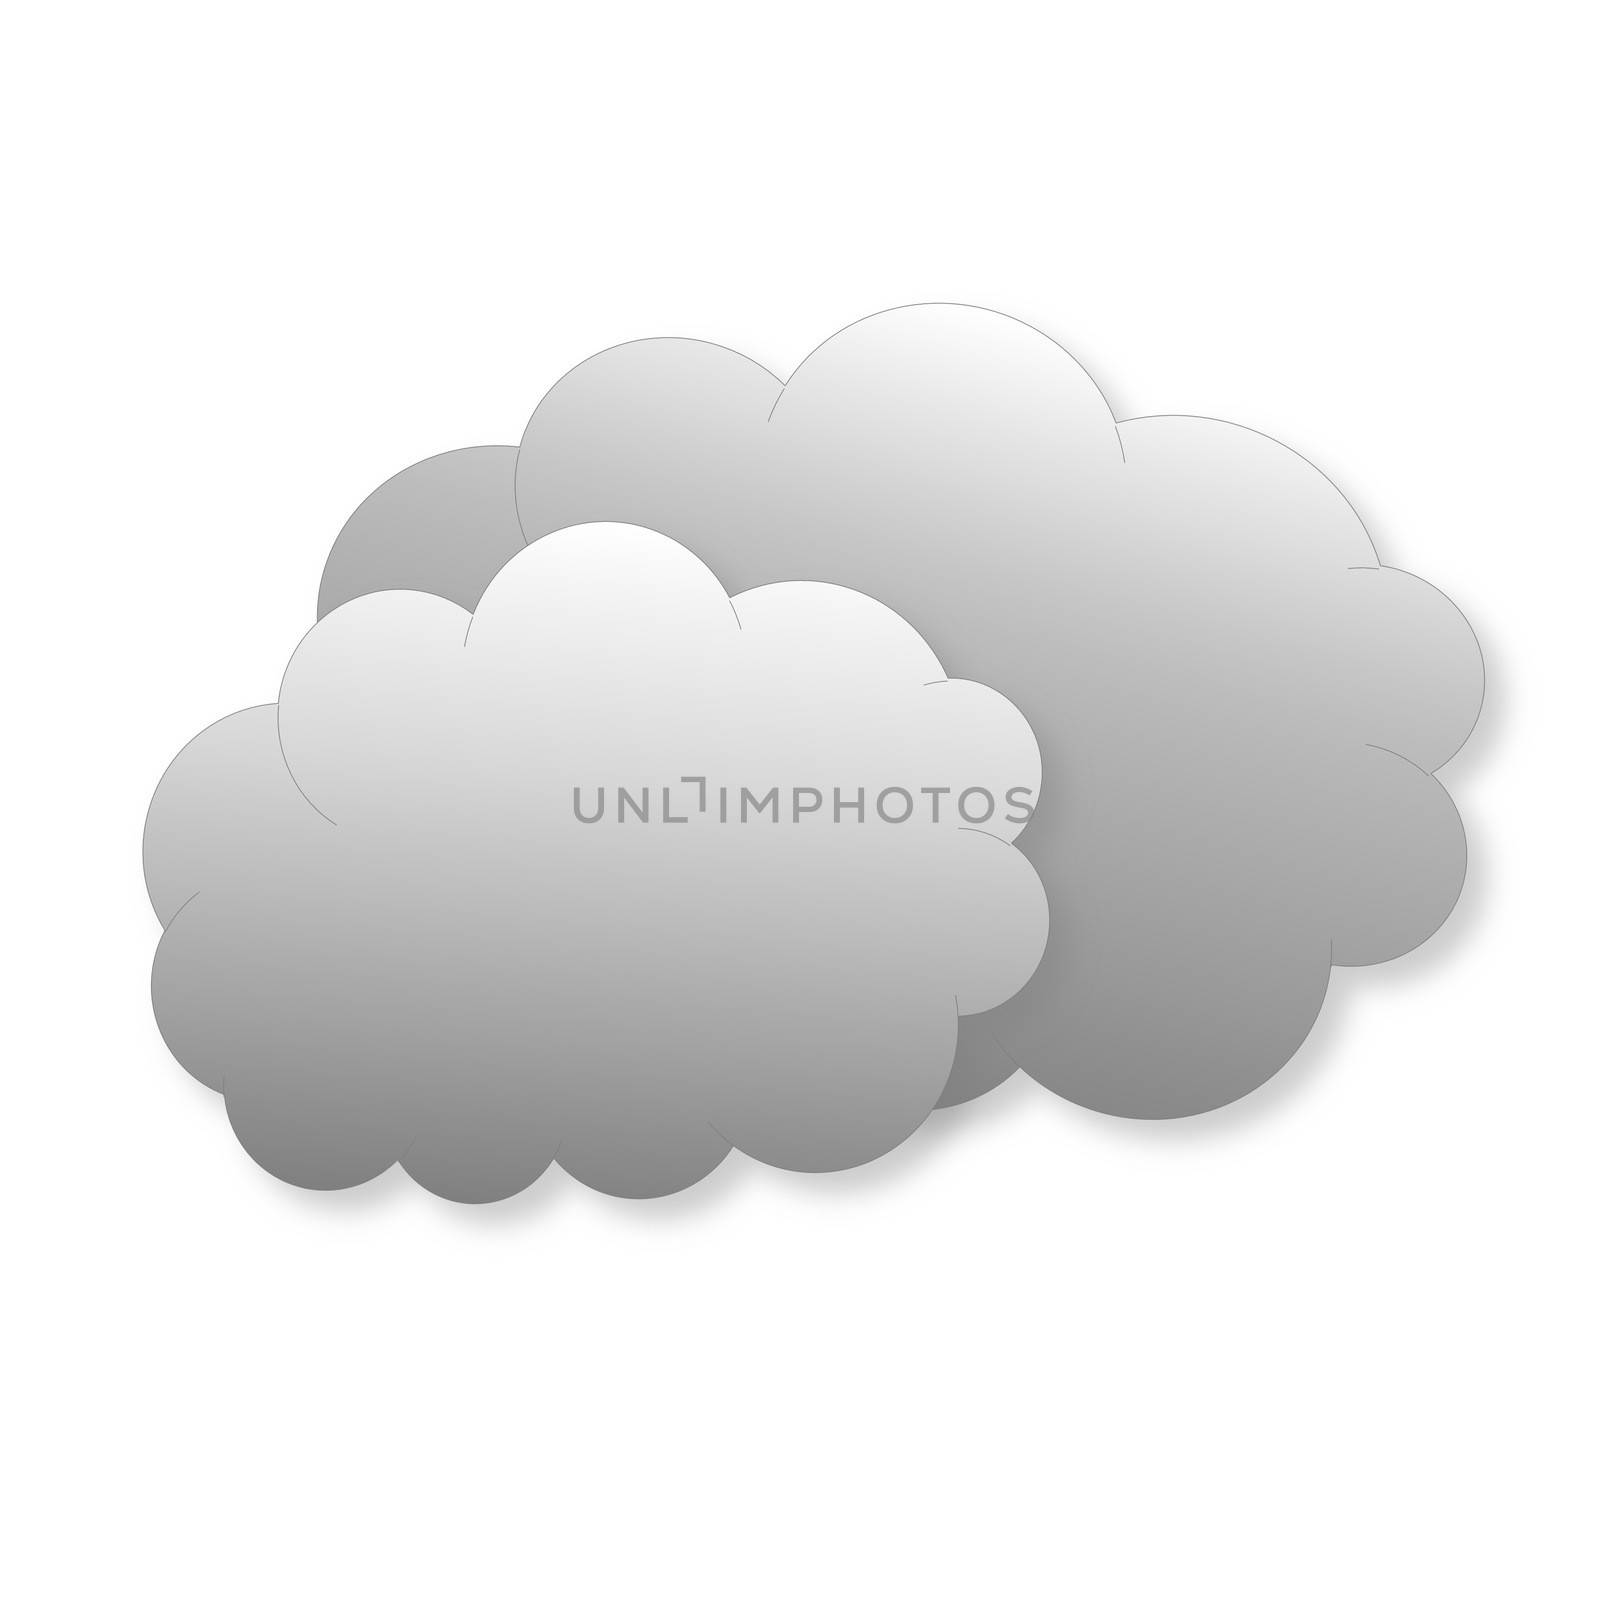 Two grey clouds as weather icon in white background